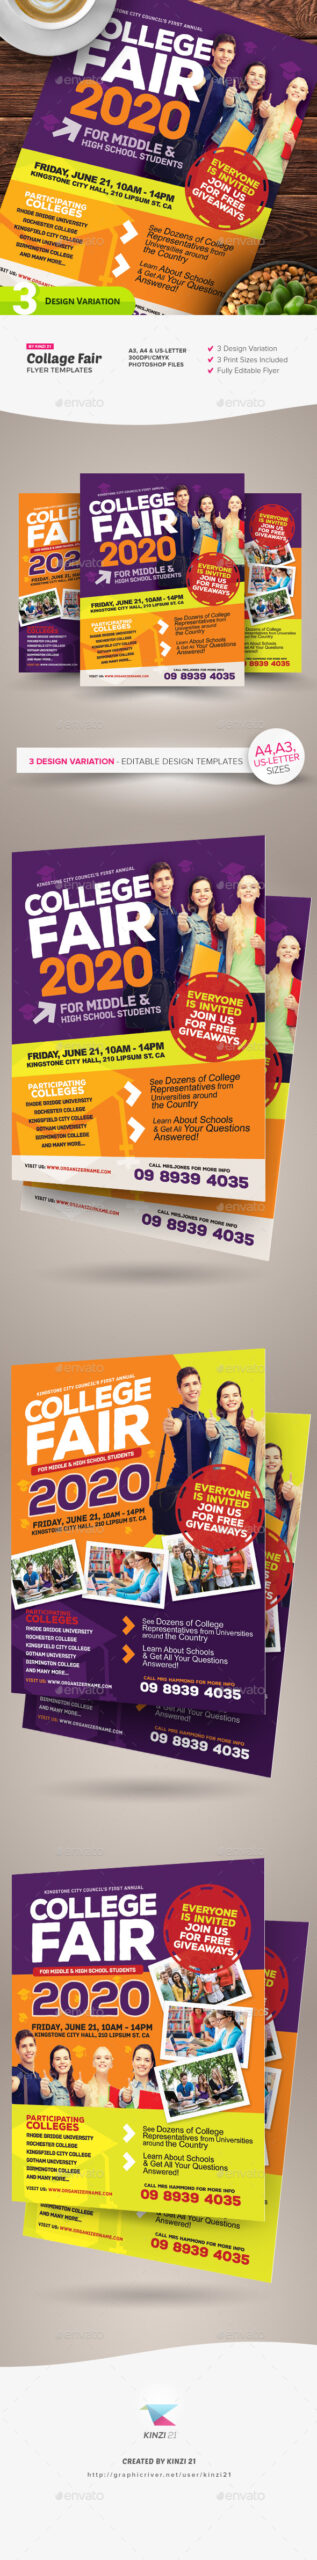 College Fair Flyer Templates Pertaining To College Fair Flyer Template Intended For College Fair Flyer Template